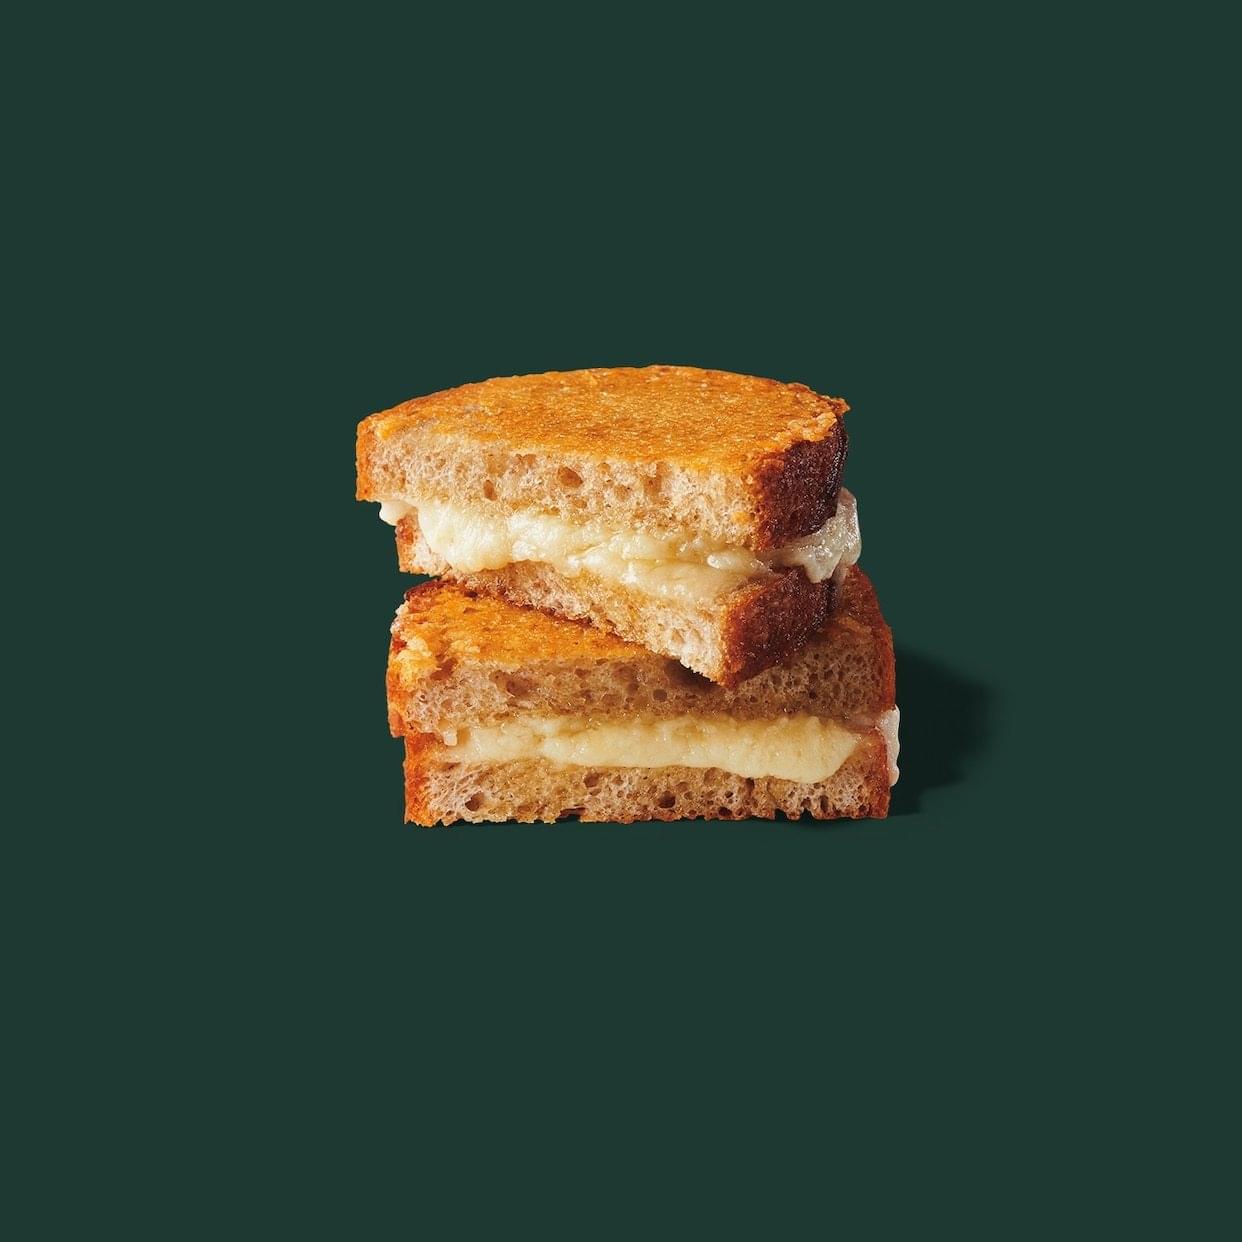 Starbucks Crispy Grilled Cheese Sandwich Nutrition Facts